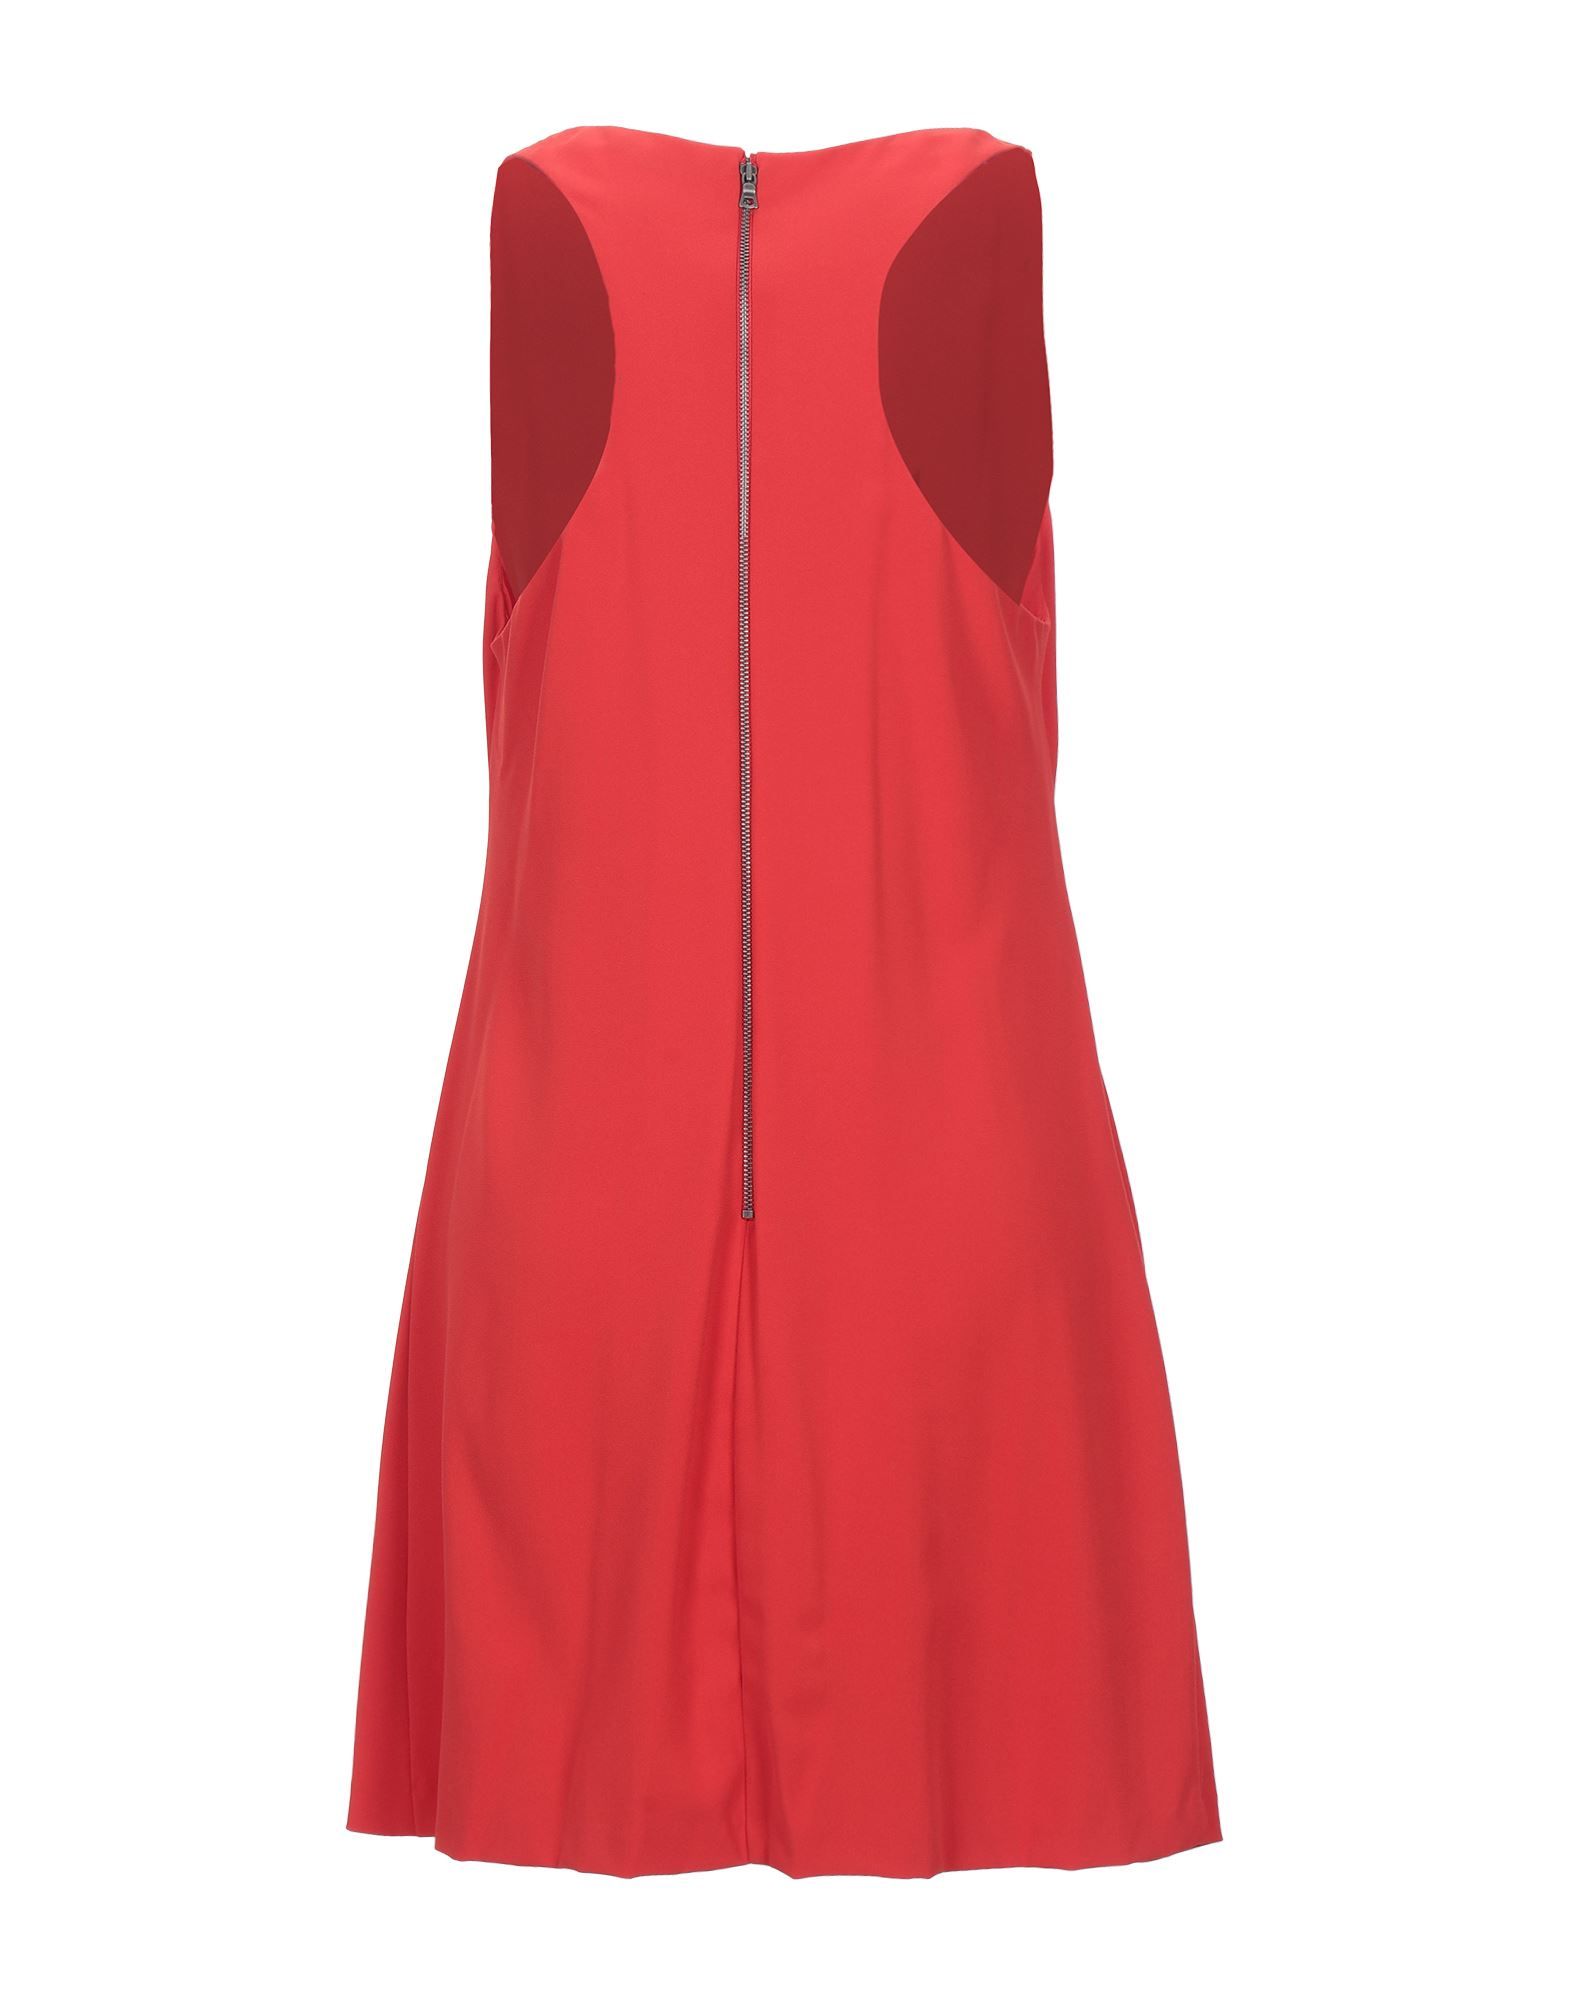 crepe, no appliqués, basic solid colour, collar with draped neckline, sleeveless, no pockets, rear closure, zipper closure, fully lined